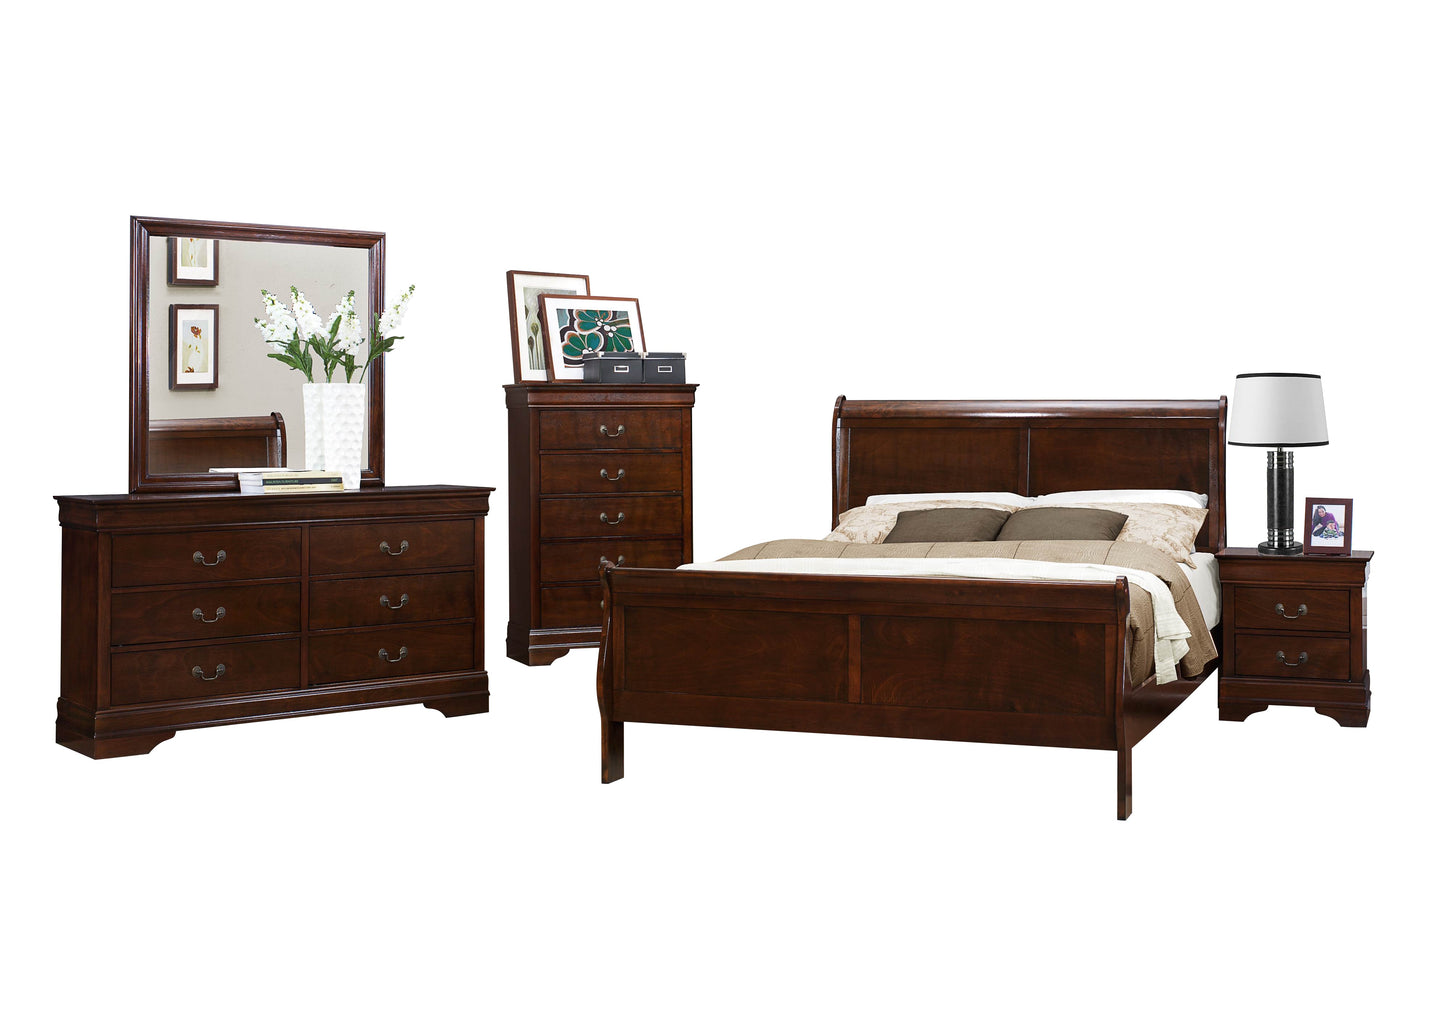 Manburg Louis Philippe 5PC Bedroom Set Cal King Bed, Dresser, Mirror, Nightstand, Chest in Burnish Cherry